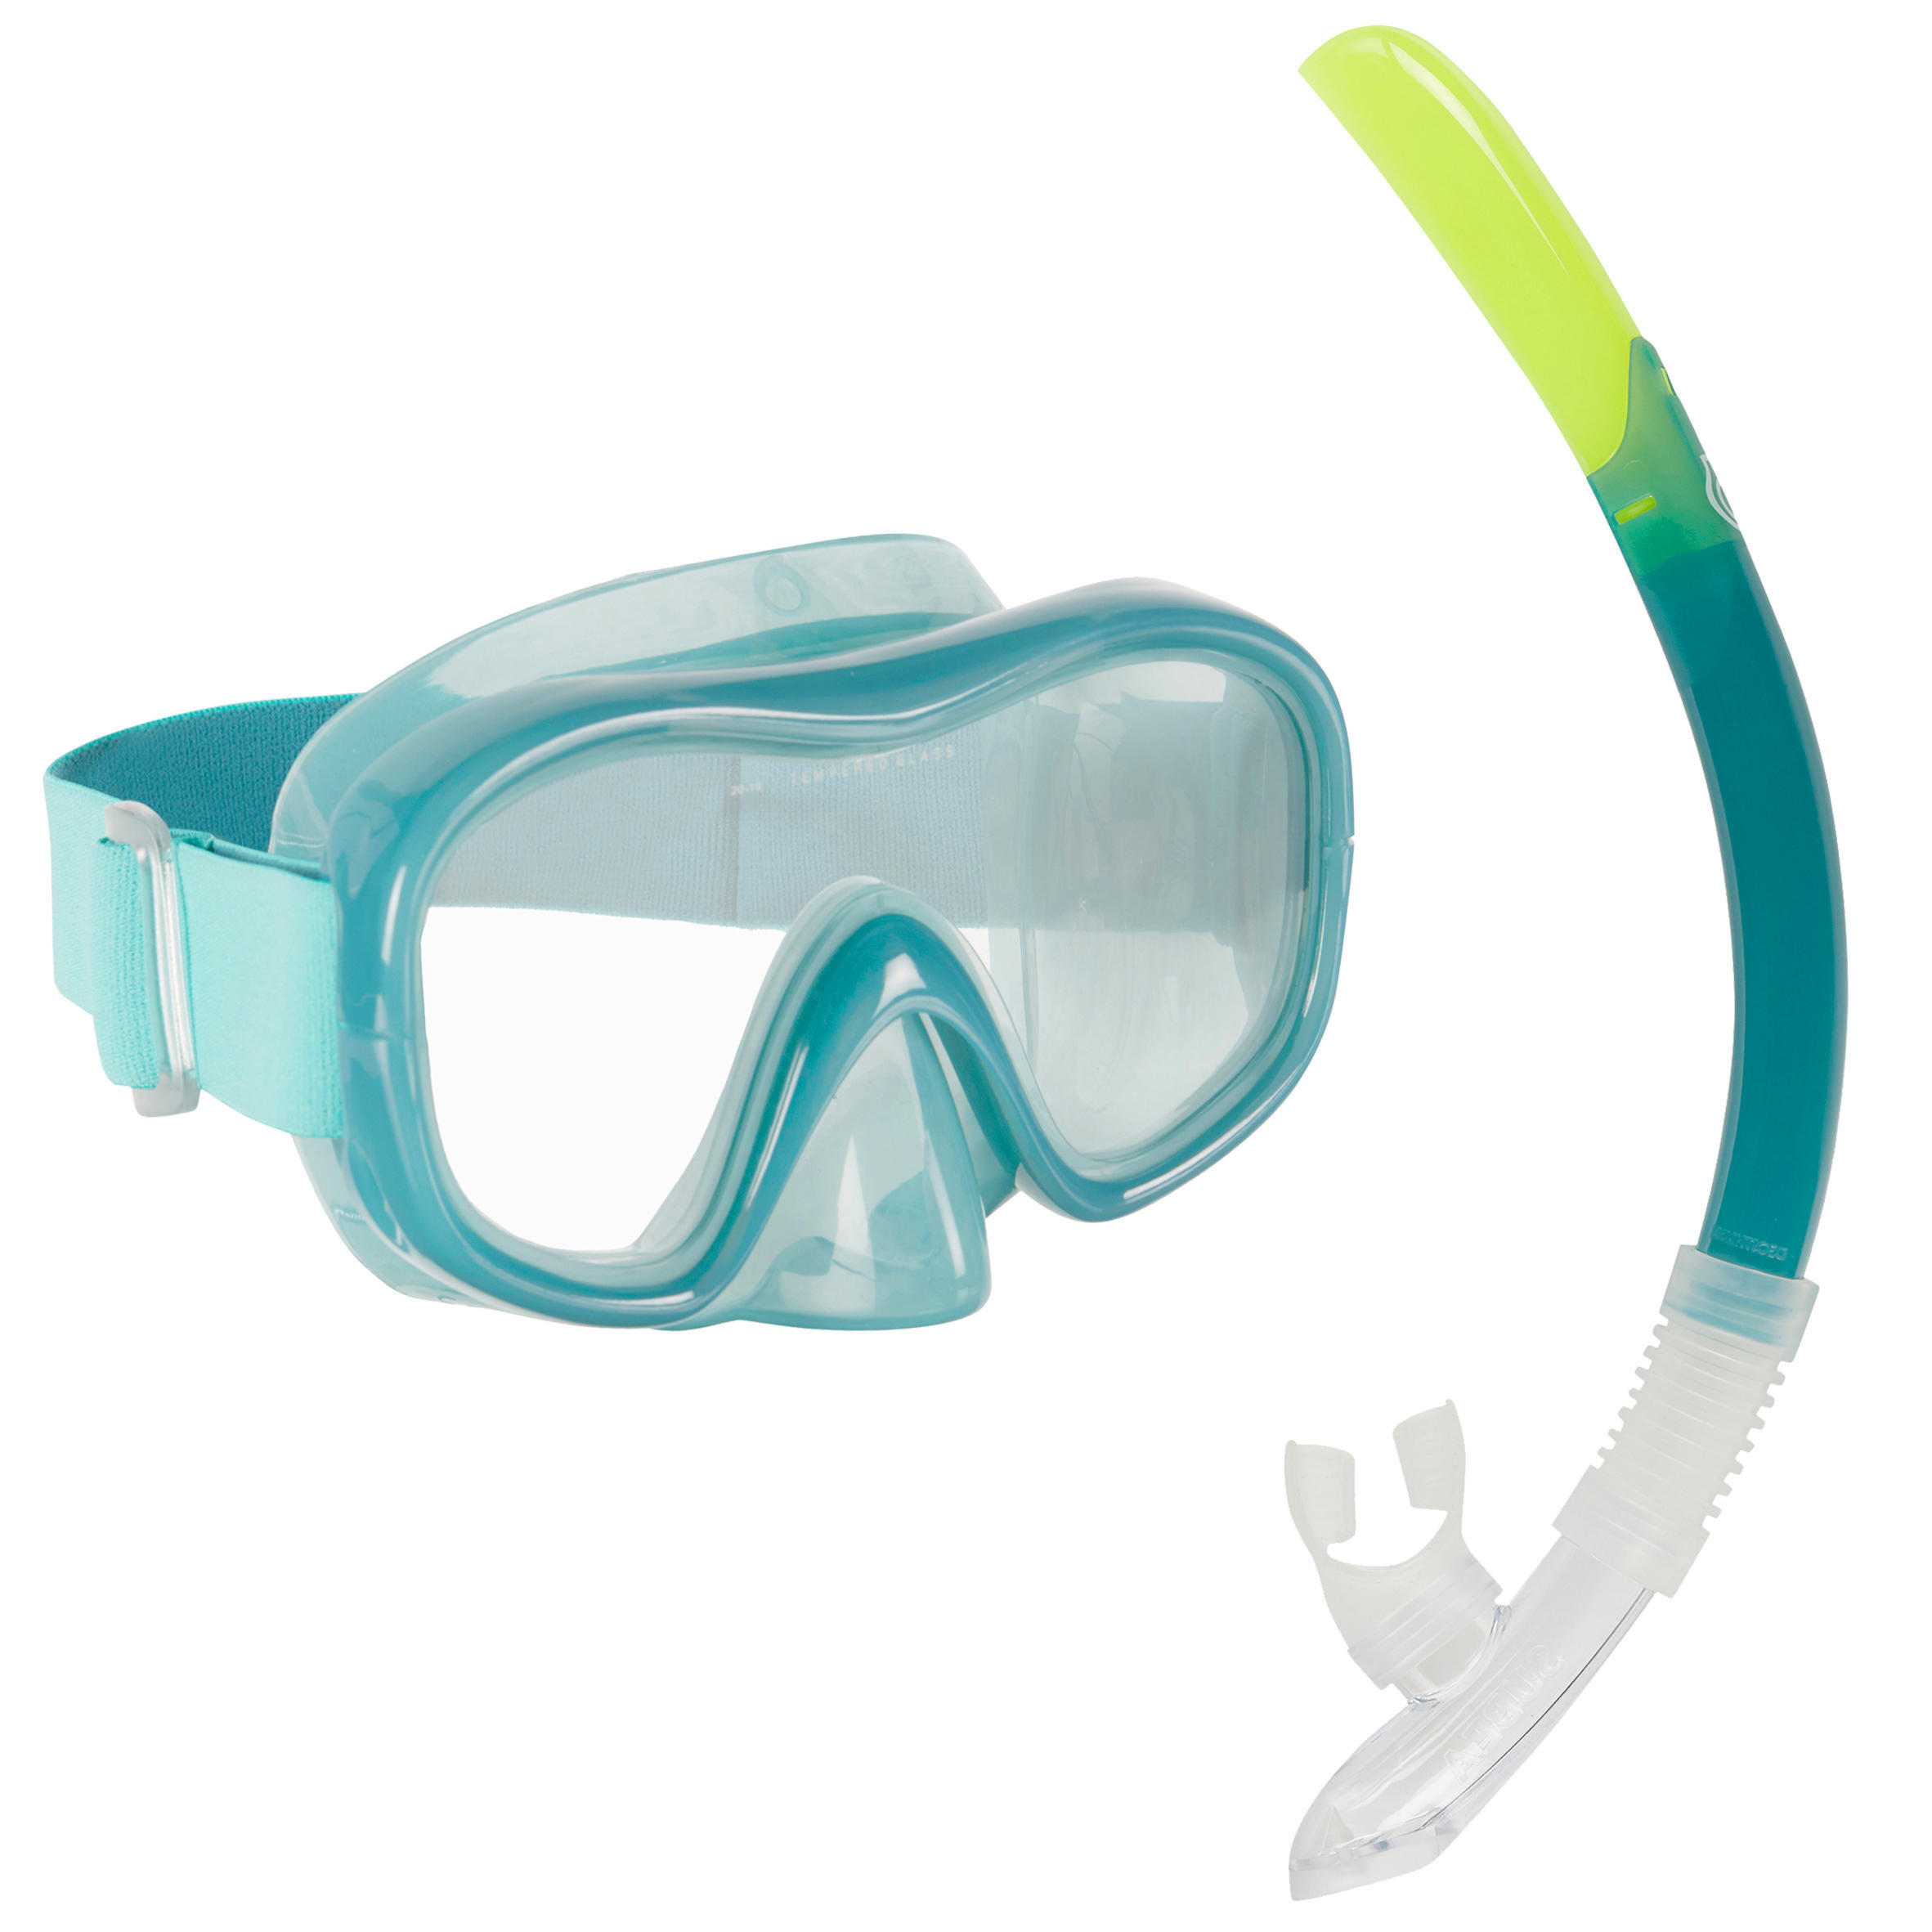 SUBEA Adult’s Diving Snorkelling Mask and Snorkel Kit SNK 100 - Pale Green